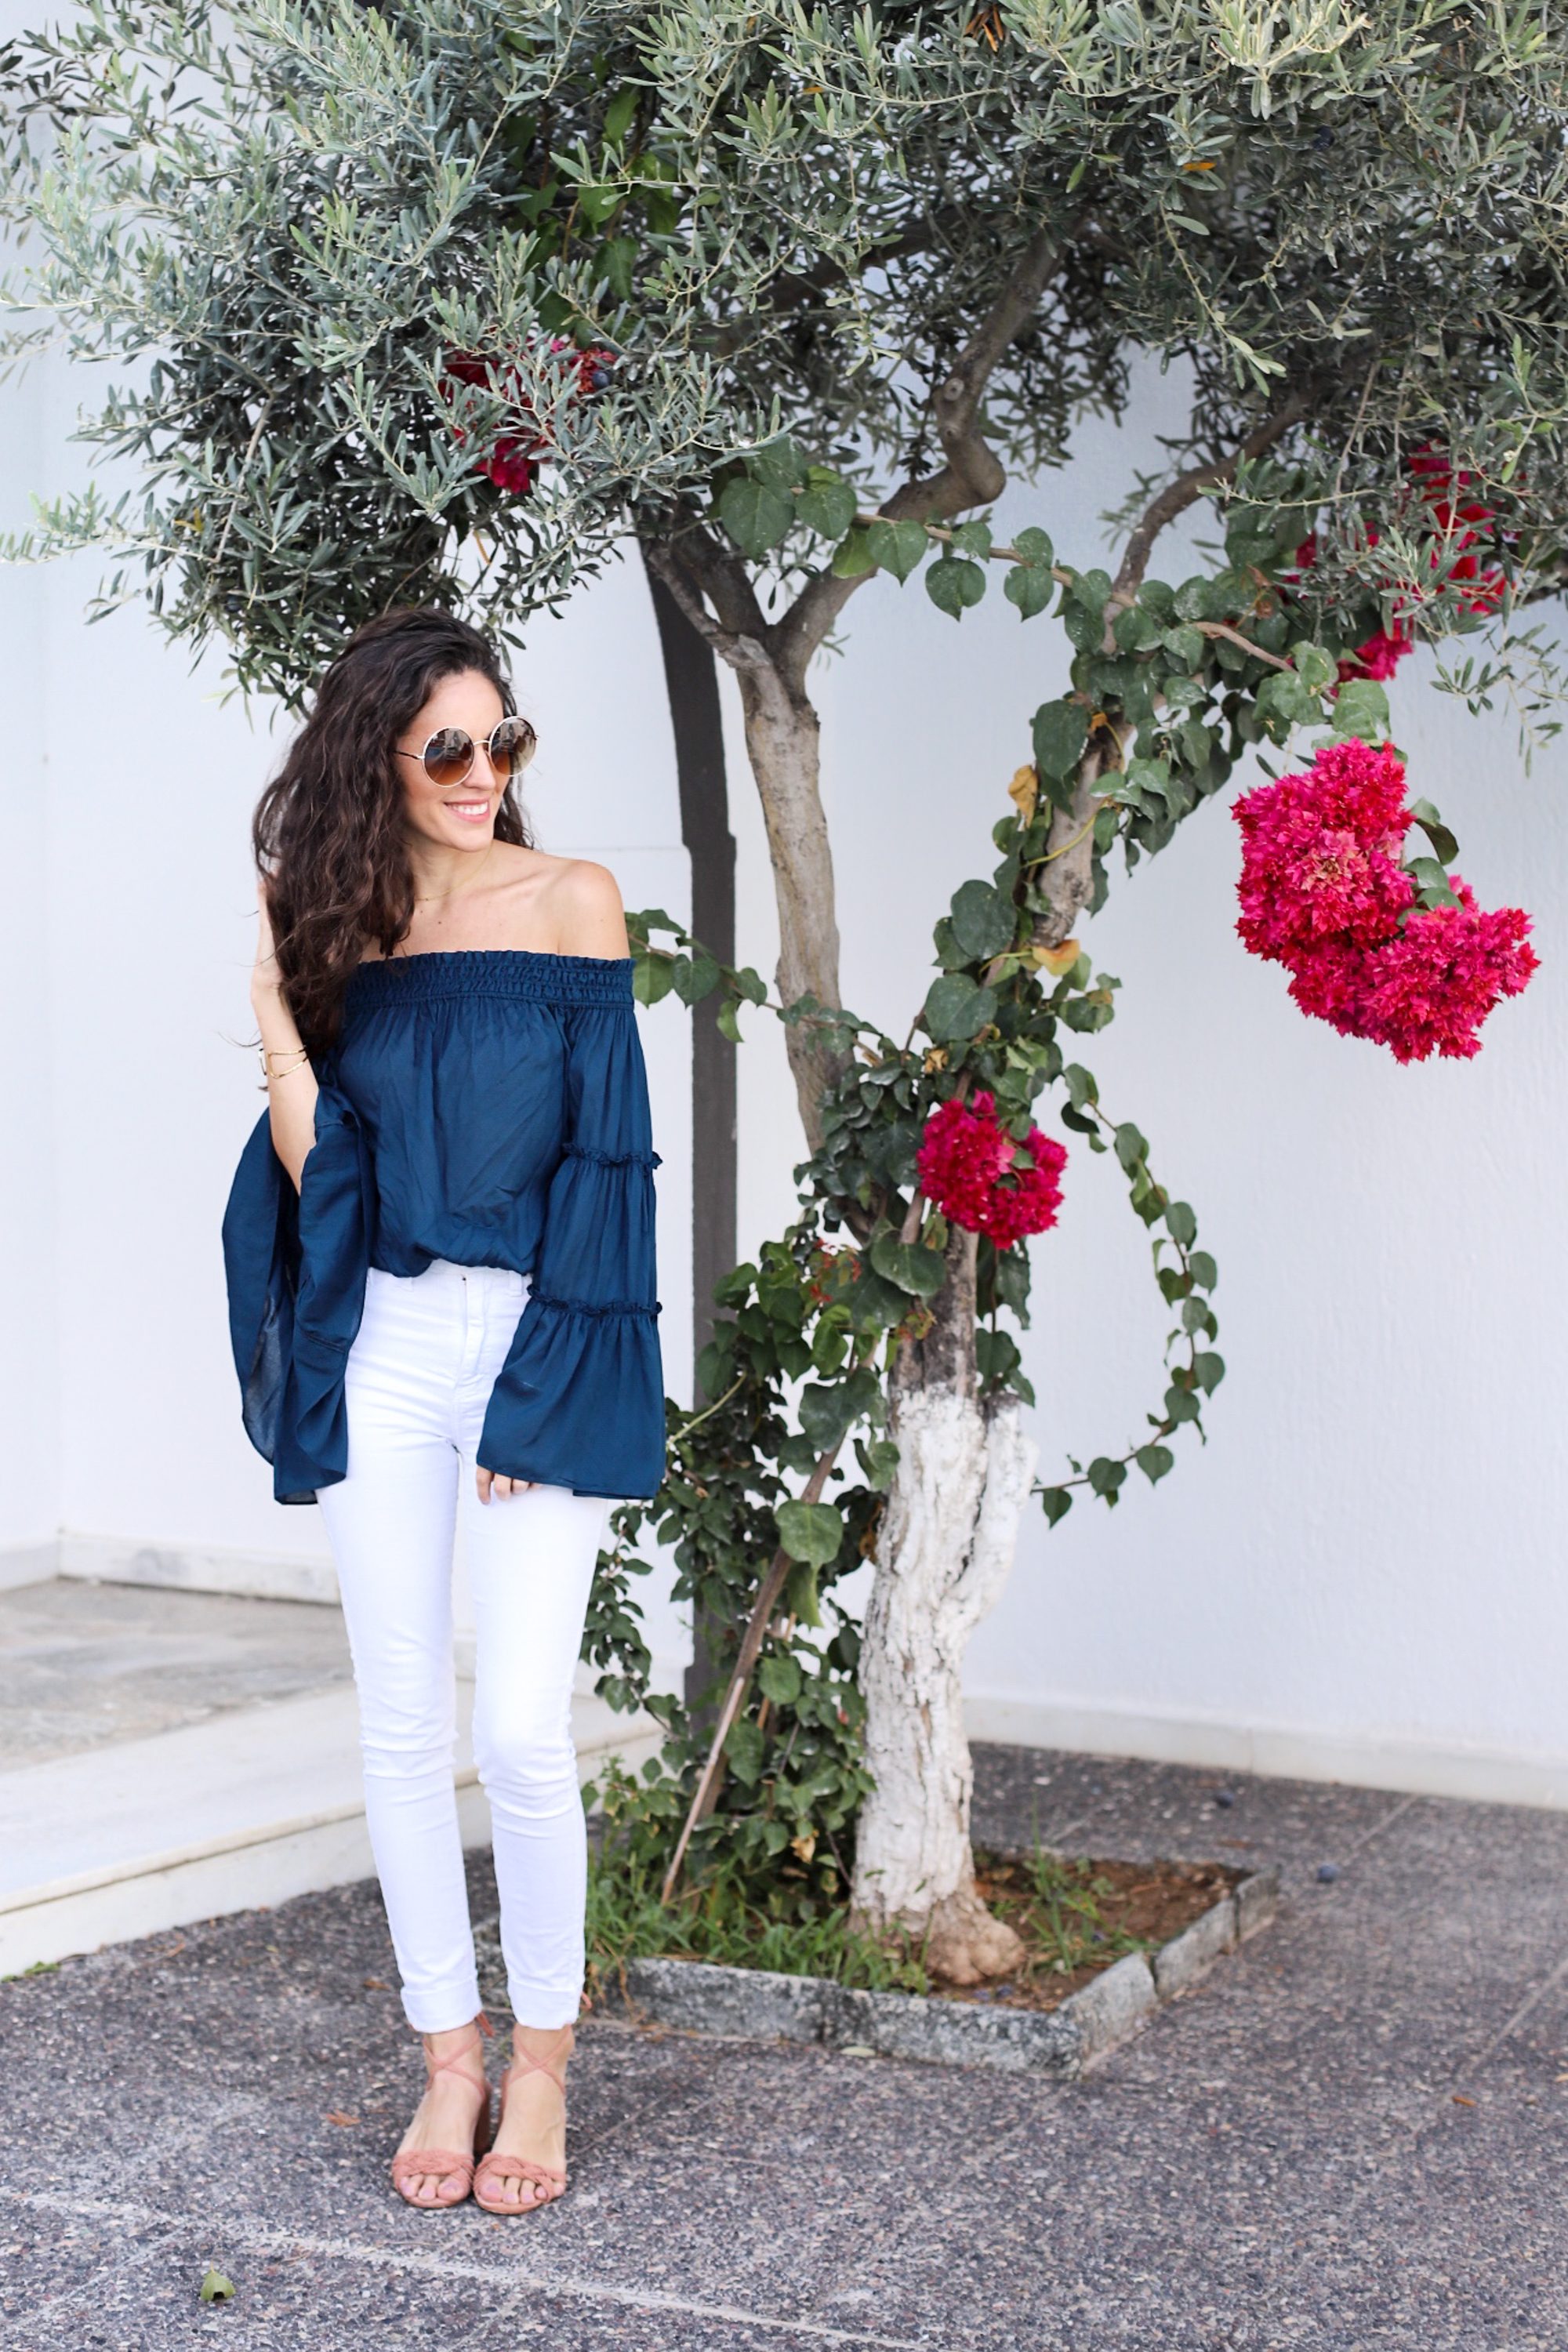 what to wear in santorini, schutz MARLIE SANDAL TOASTED, FREE PEOPLE FREE SPIRIT RUFFLE TIER OFF THE SHOULDER BLOUSE in turquoise, bell sleeves, off the shoulder top, blue and white, summer to fall outfit ideas